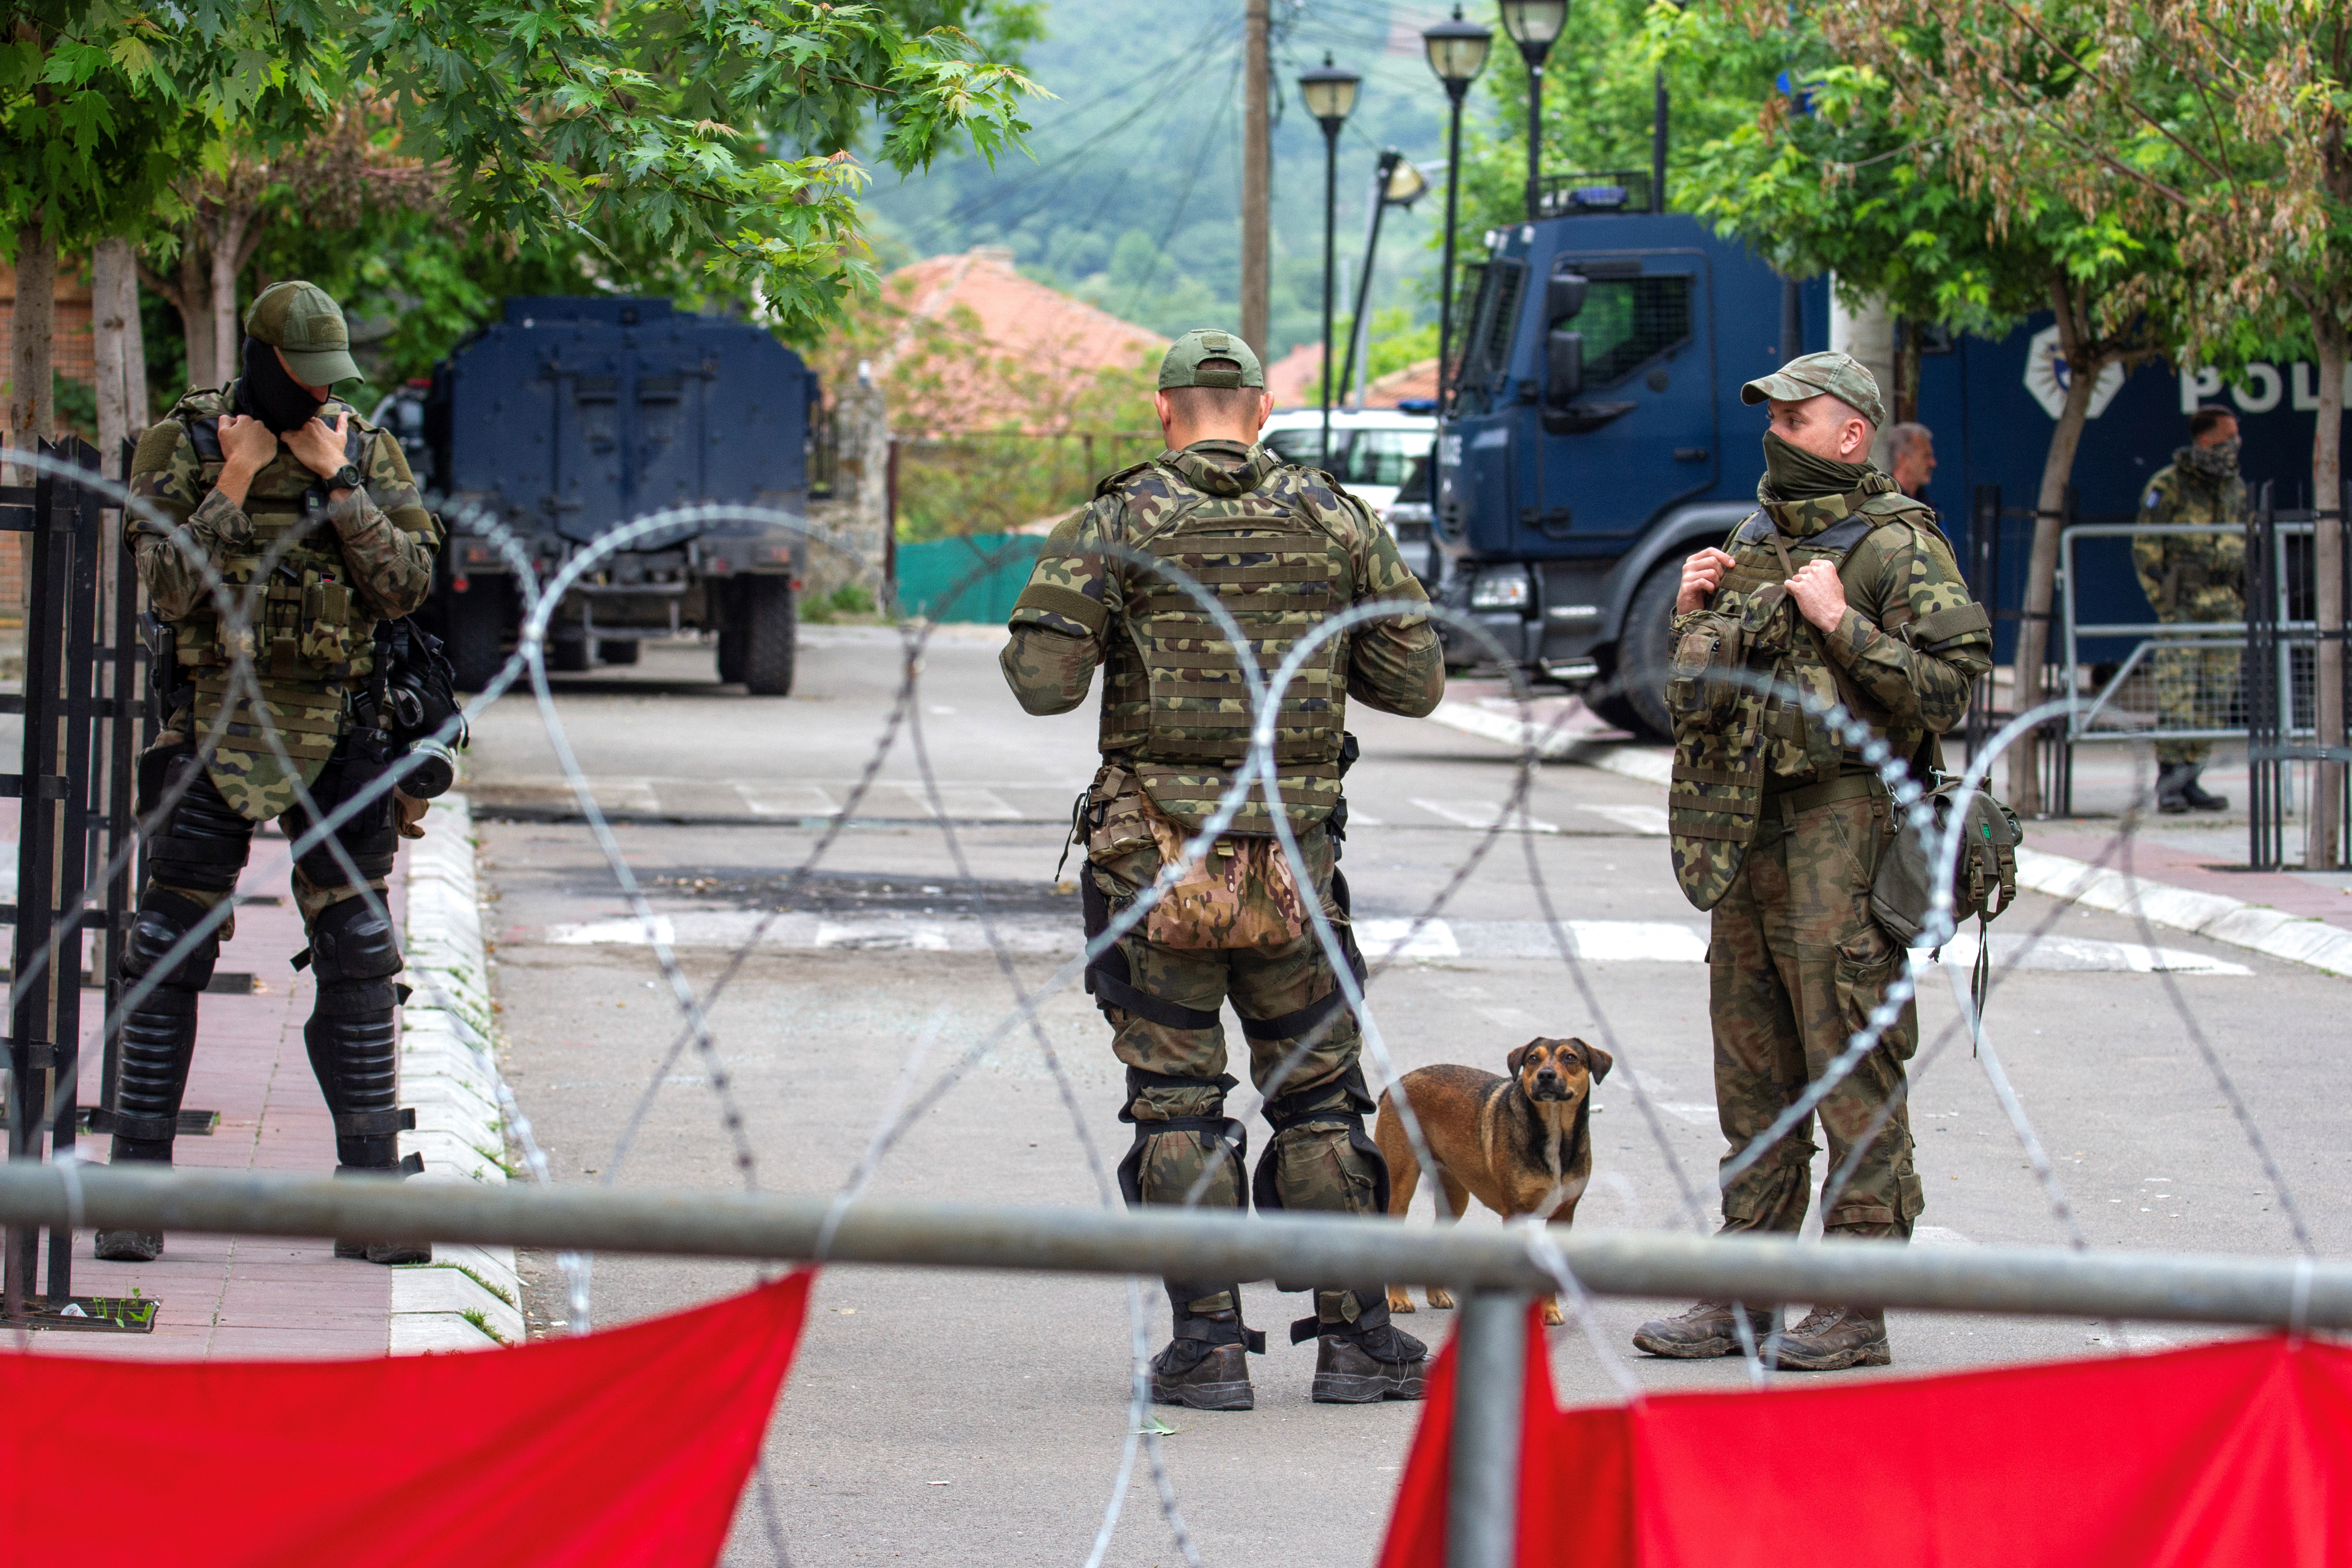 NATO Kosovo Force (KFOR) soldiers stand guard behind razor wire fence in the town of Zvecan